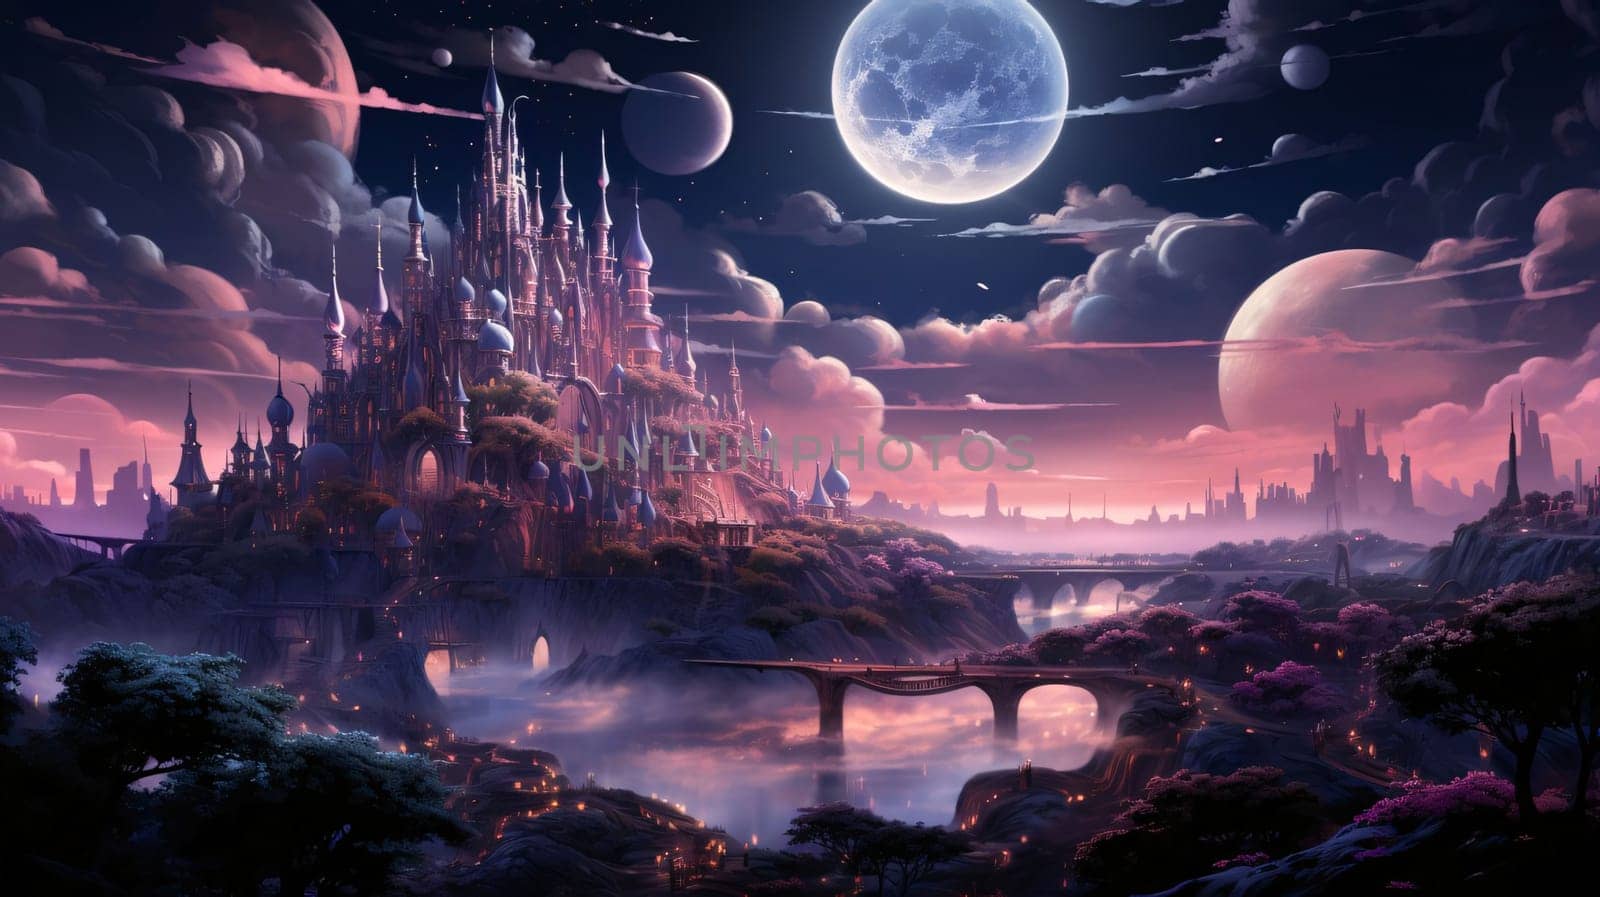 Fantasy landscape with fantasy city and moon. 3D illustration. by ThemesS